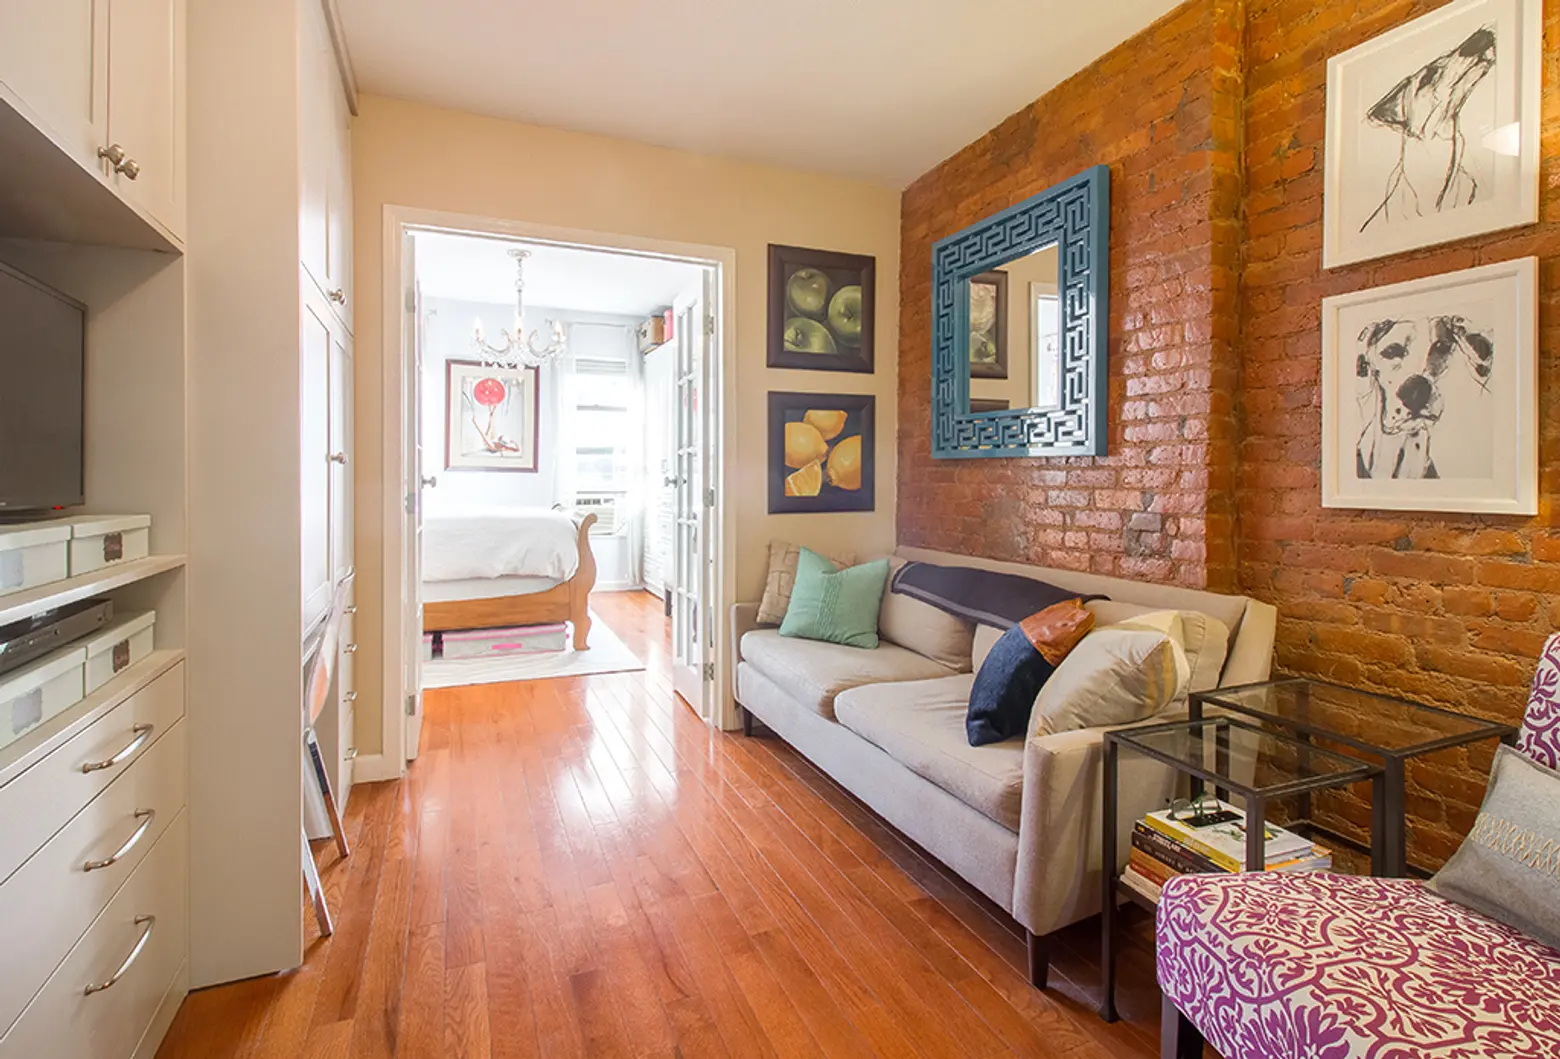 Exposed brick, built-ins, and a shoe closet make this $389K Upper East Side one-bedroom a shoo-in